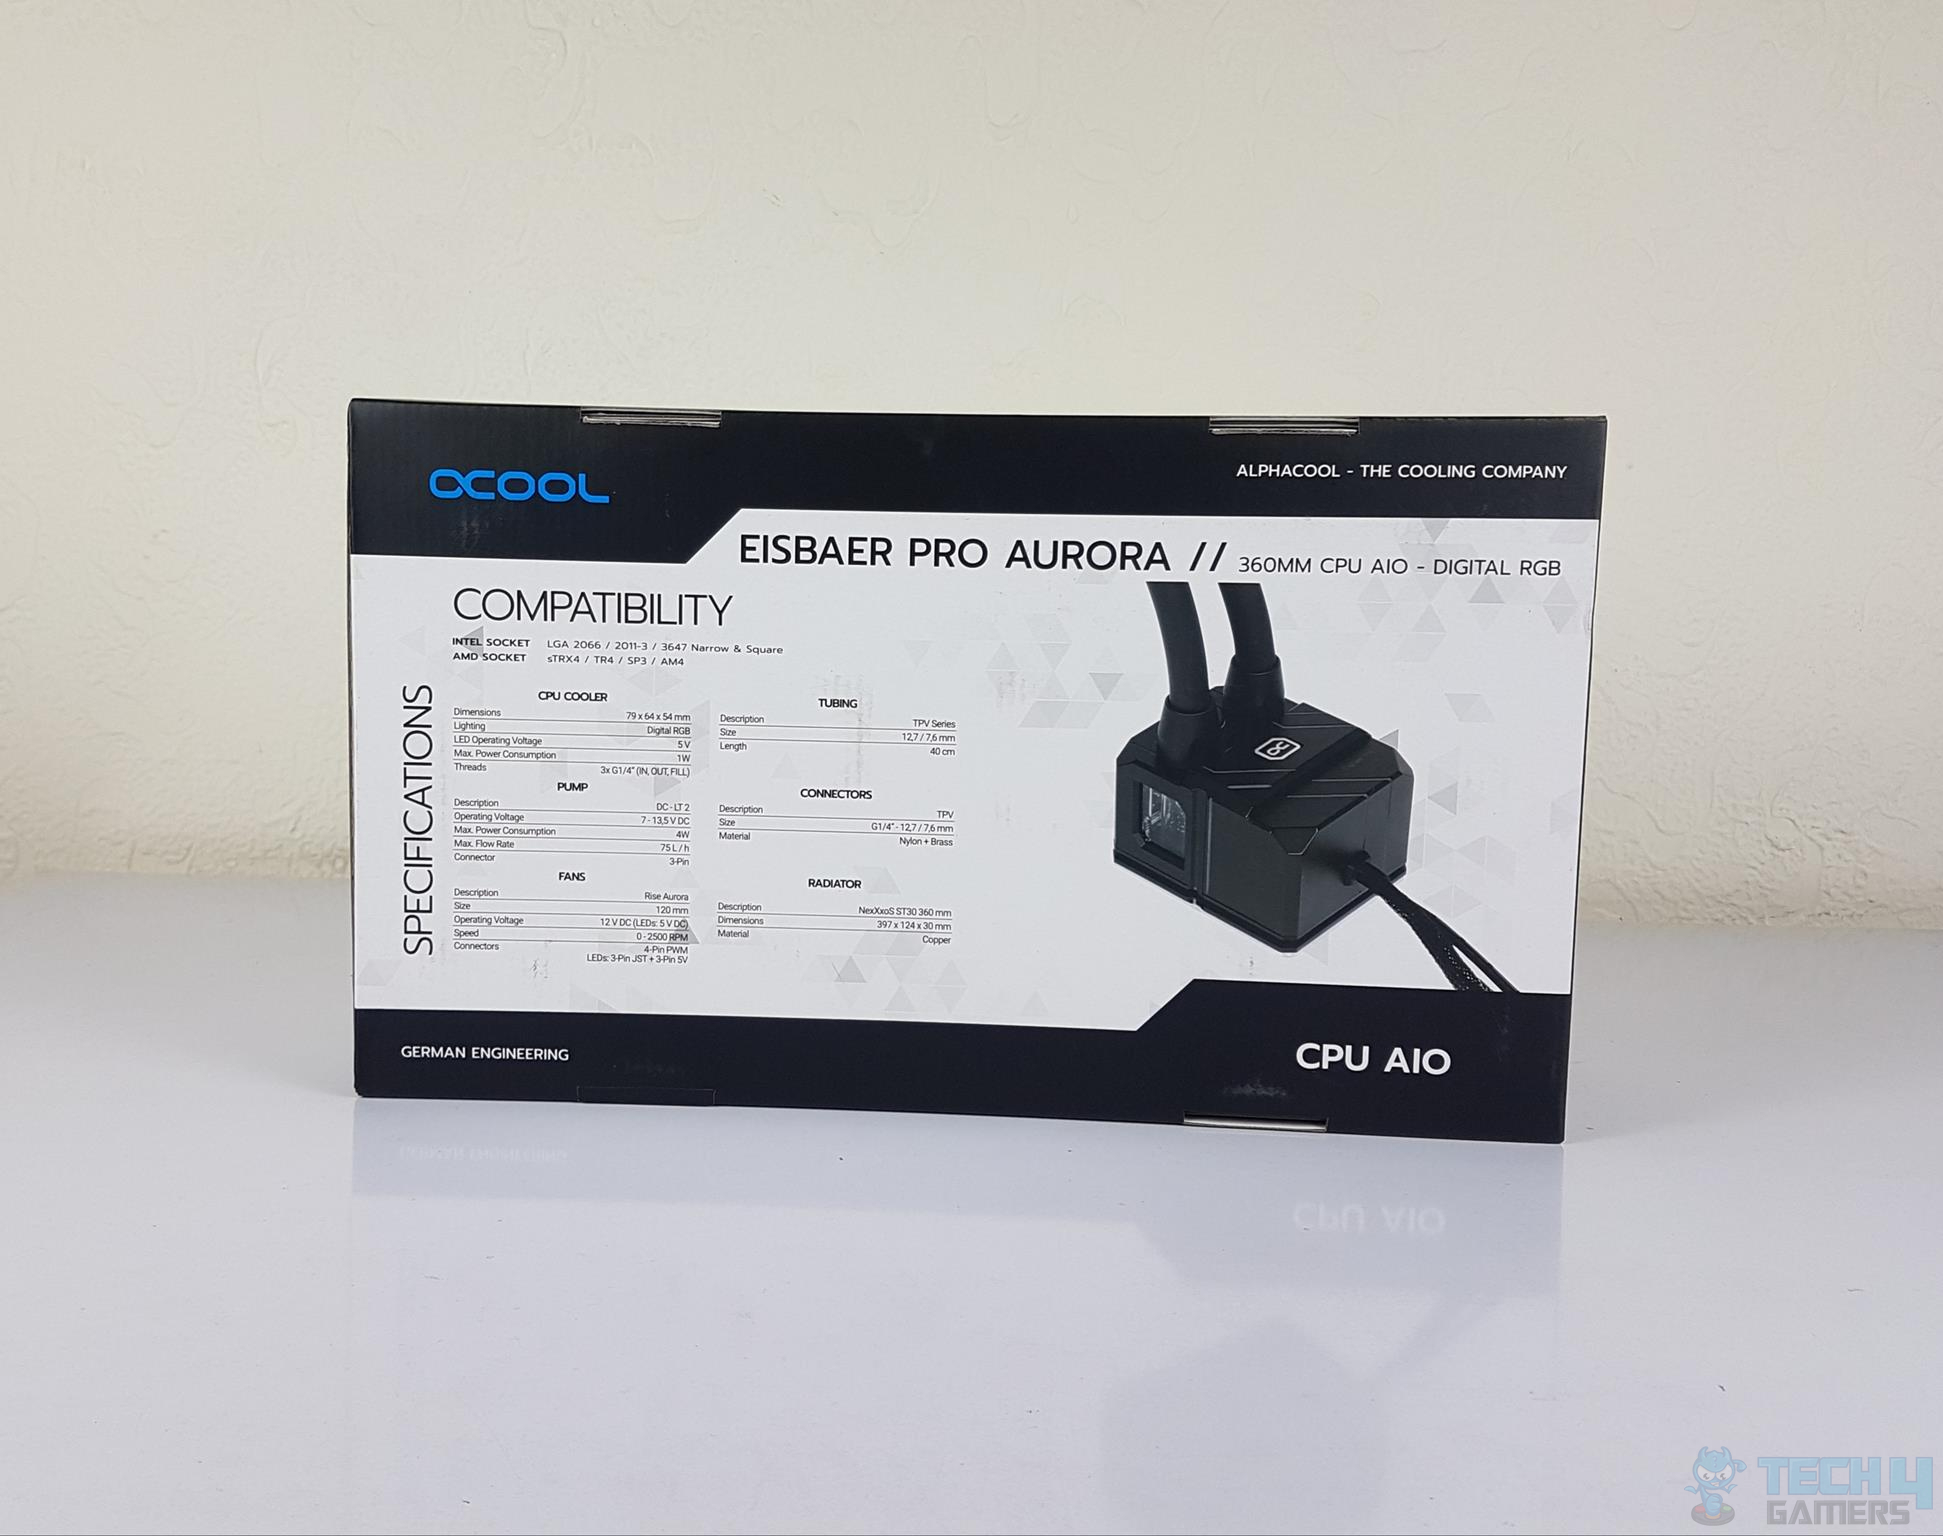 ALPHACOOL Eisbaer Pro HPE Aurora 360 AIO — The backside of the box